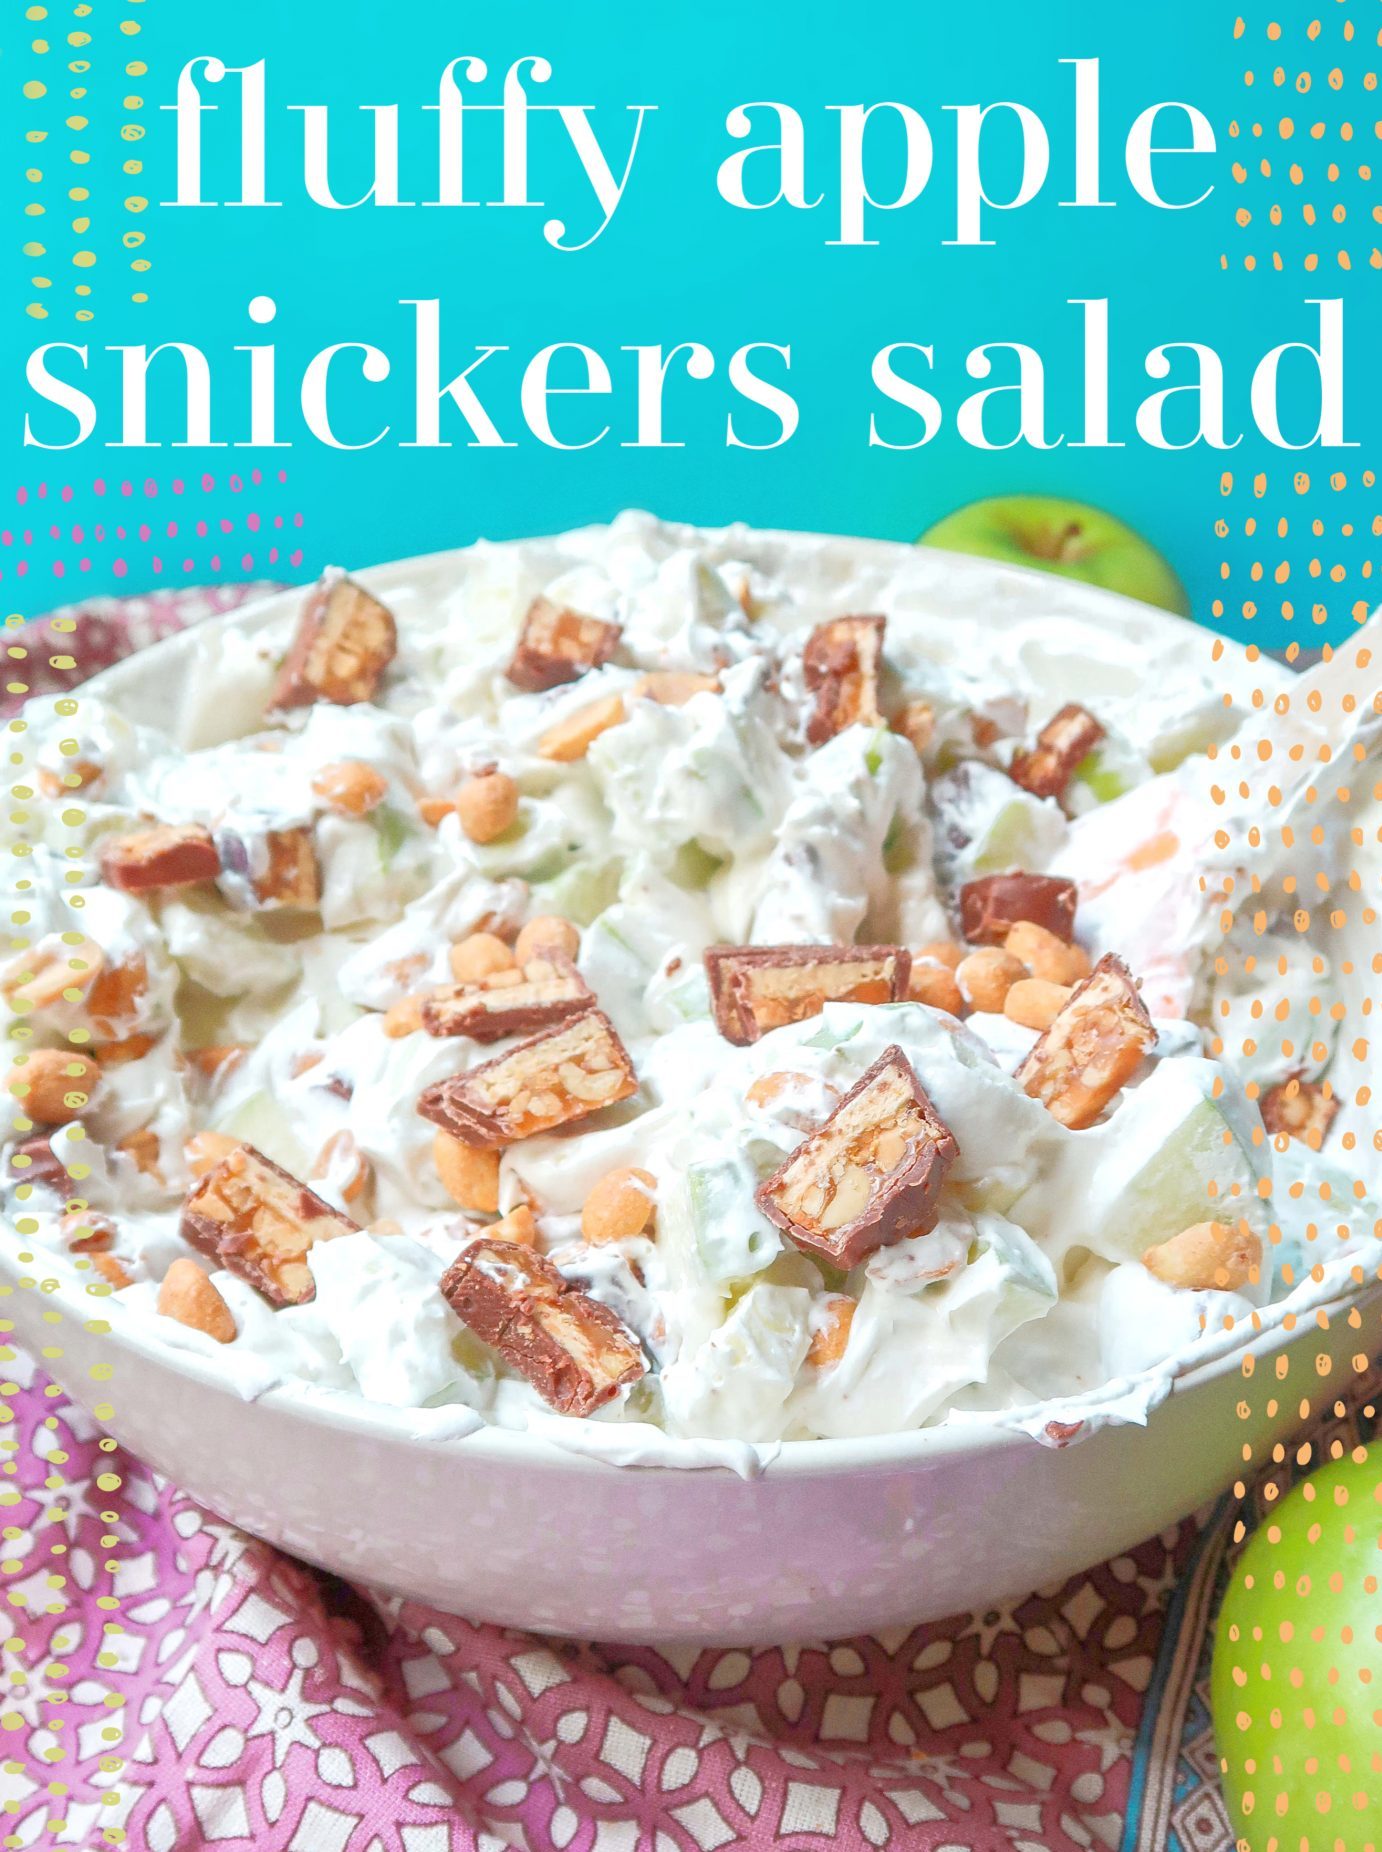 apple snickers salad, whipped cream, vanilla pudding, creamy, dessert salad, summer bbq, party food, chilled salad, summer